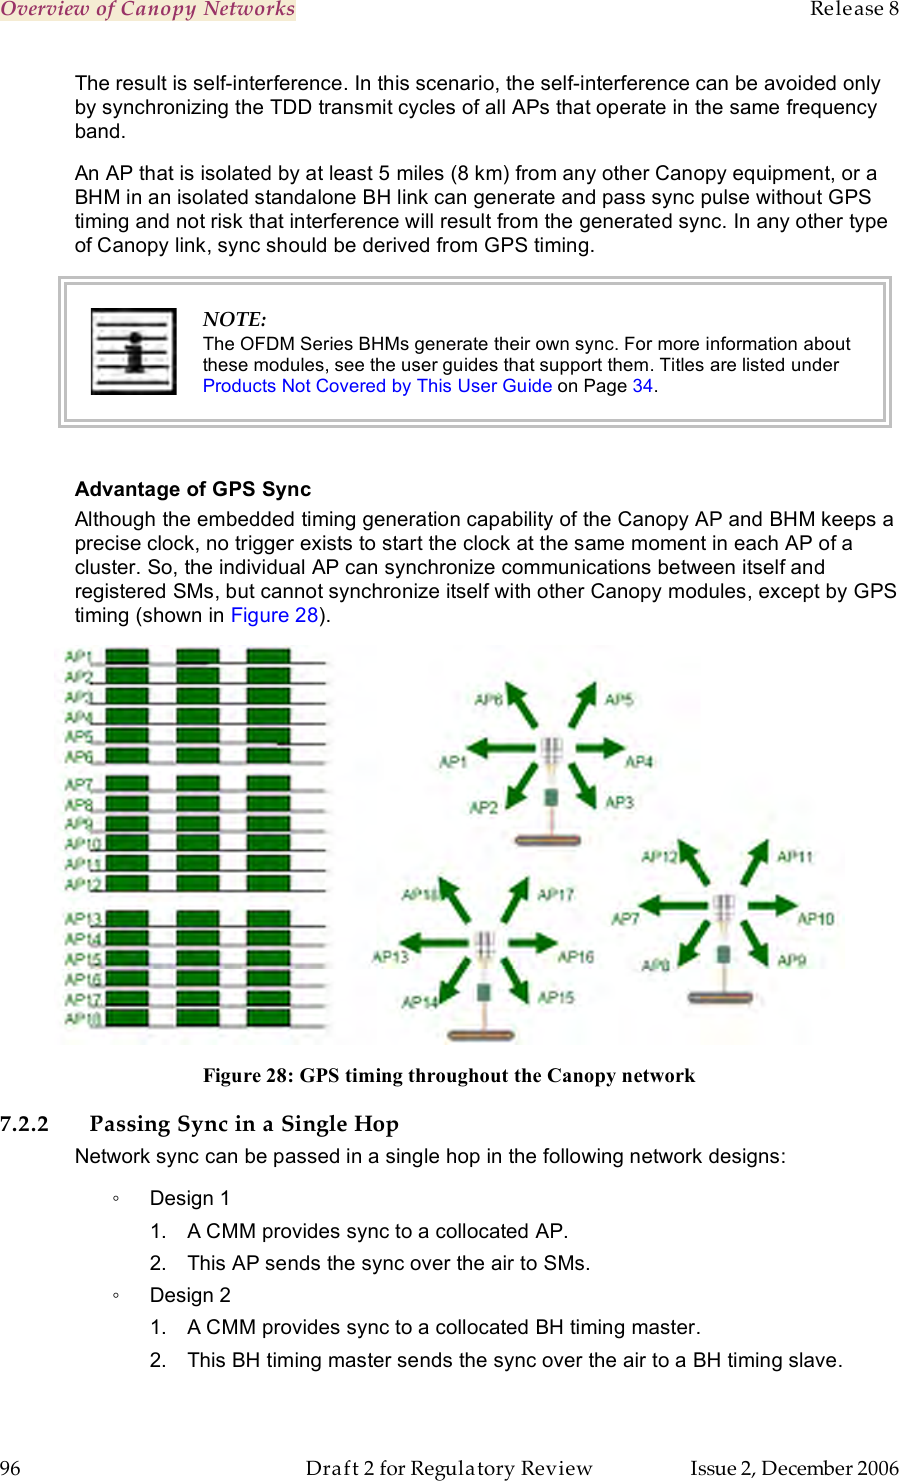 Overview of Canopy Networks    Release 8   96  Draft 2 for Regulatory Review  Issue 2, December 2006 The result is self-interference. In this scenario, the self-interference can be avoided only by synchronizing the TDD transmit cycles of all APs that operate in the same frequency band. An AP that is isolated by at least 5 miles (8 km) from any other Canopy equipment, or a BHM in an isolated standalone BH link can generate and pass sync pulse without GPS timing and not risk that interference will result from the generated sync. In any other type of Canopy link, sync should be derived from GPS timing.  NOTE: The OFDM Series BHMs generate their own sync. For more information about these modules, see the user guides that support them. Titles are listed under Products Not Covered by This User Guide on Page 34.  Advantage of GPS Sync Although the embedded timing generation capability of the Canopy AP and BHM keeps a precise clock, no trigger exists to start the clock at the same moment in each AP of a cluster. So, the individual AP can synchronize communications between itself and registered SMs, but cannot synchronize itself with other Canopy modules, except by GPS timing (shown in Figure 28).  Figure 28: GPS timing throughout the Canopy network 7.2.2 Passing Sync in a Single Hop Network sync can be passed in a single hop in the following network designs: ◦  Design 1 1.  A CMM provides sync to a collocated AP. 2.  This AP sends the sync over the air to SMs. ◦  Design 2 1.  A CMM provides sync to a collocated BH timing master. 2.  This BH timing master sends the sync over the air to a BH timing slave. 